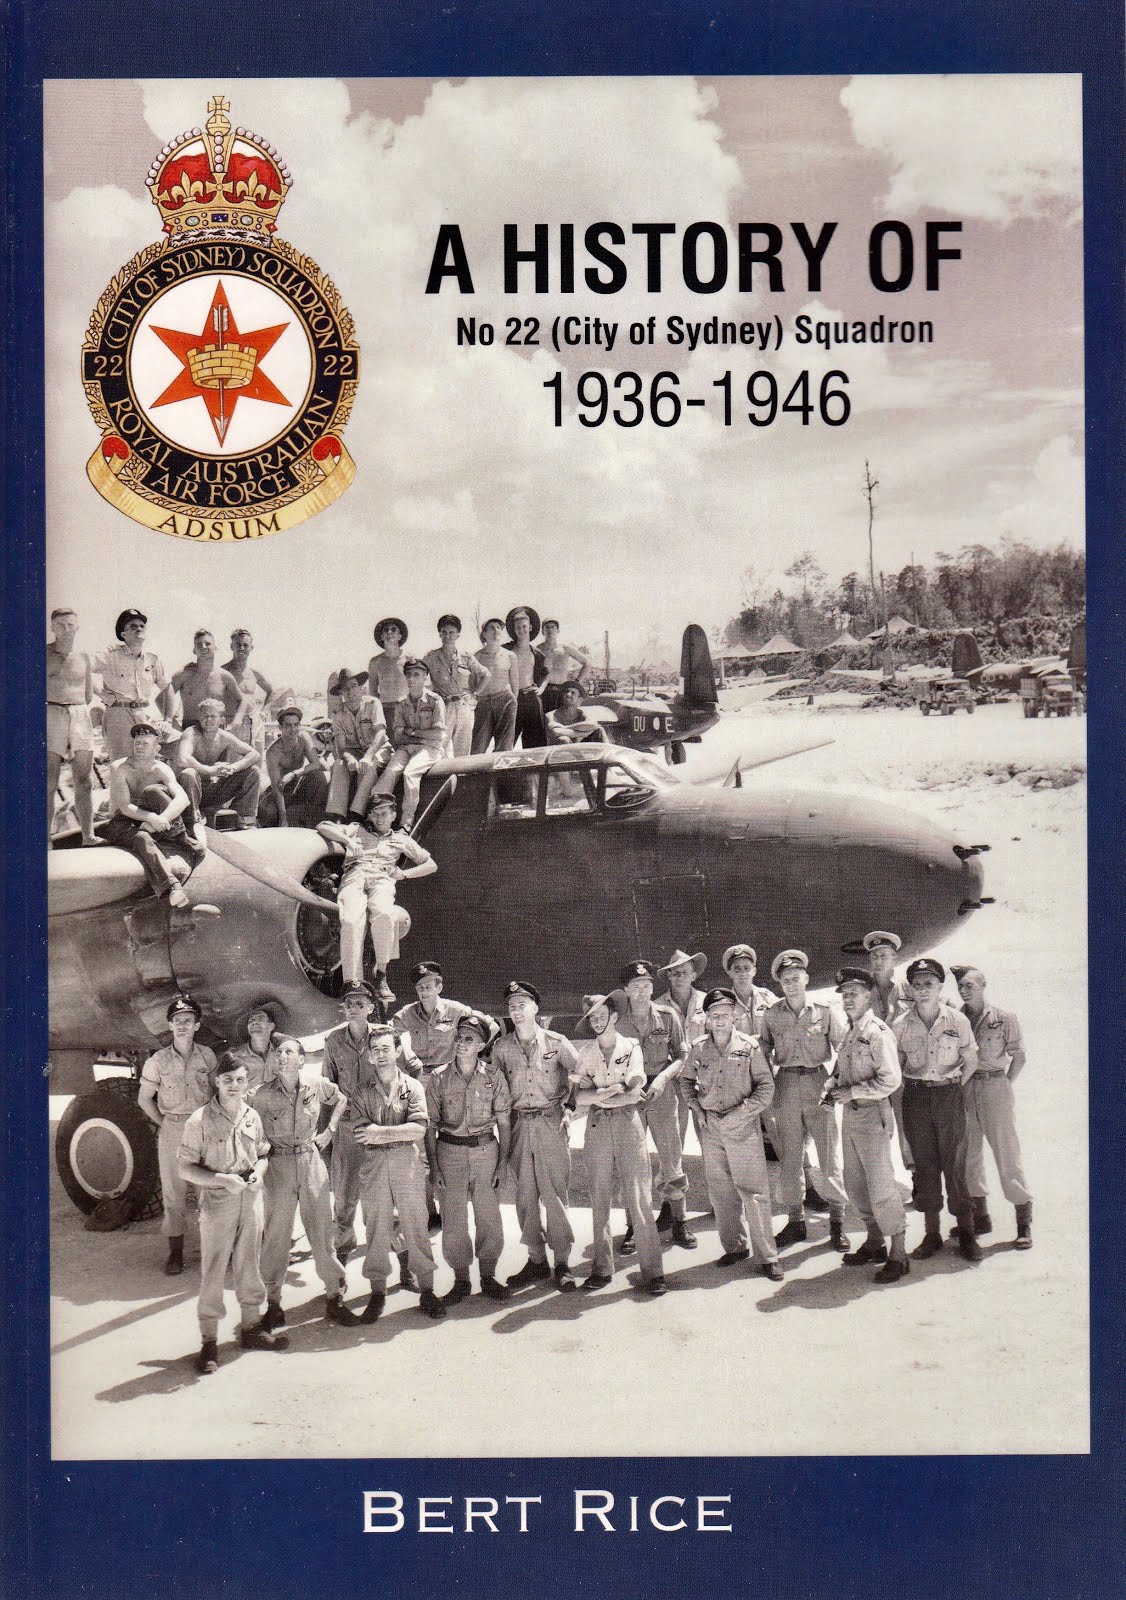 A History of 22 Squadron